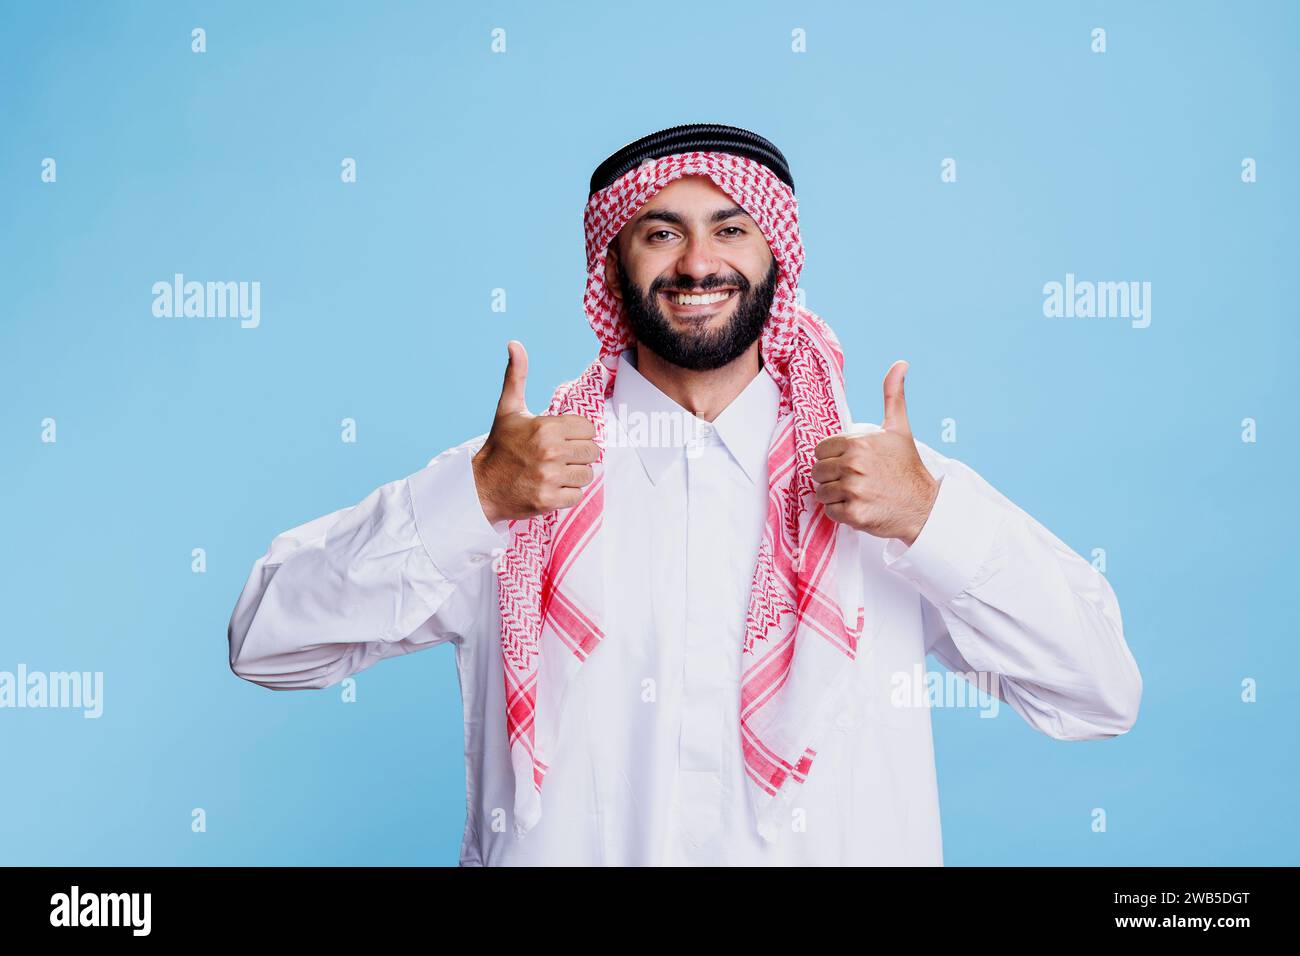 Muslim man wearing traditional arab clothes standing with thumbs up gesture symbolizing agreement and positivity portrait. Cheerful arab dressed in thobe and headscarf showing approve sign Stock Photo